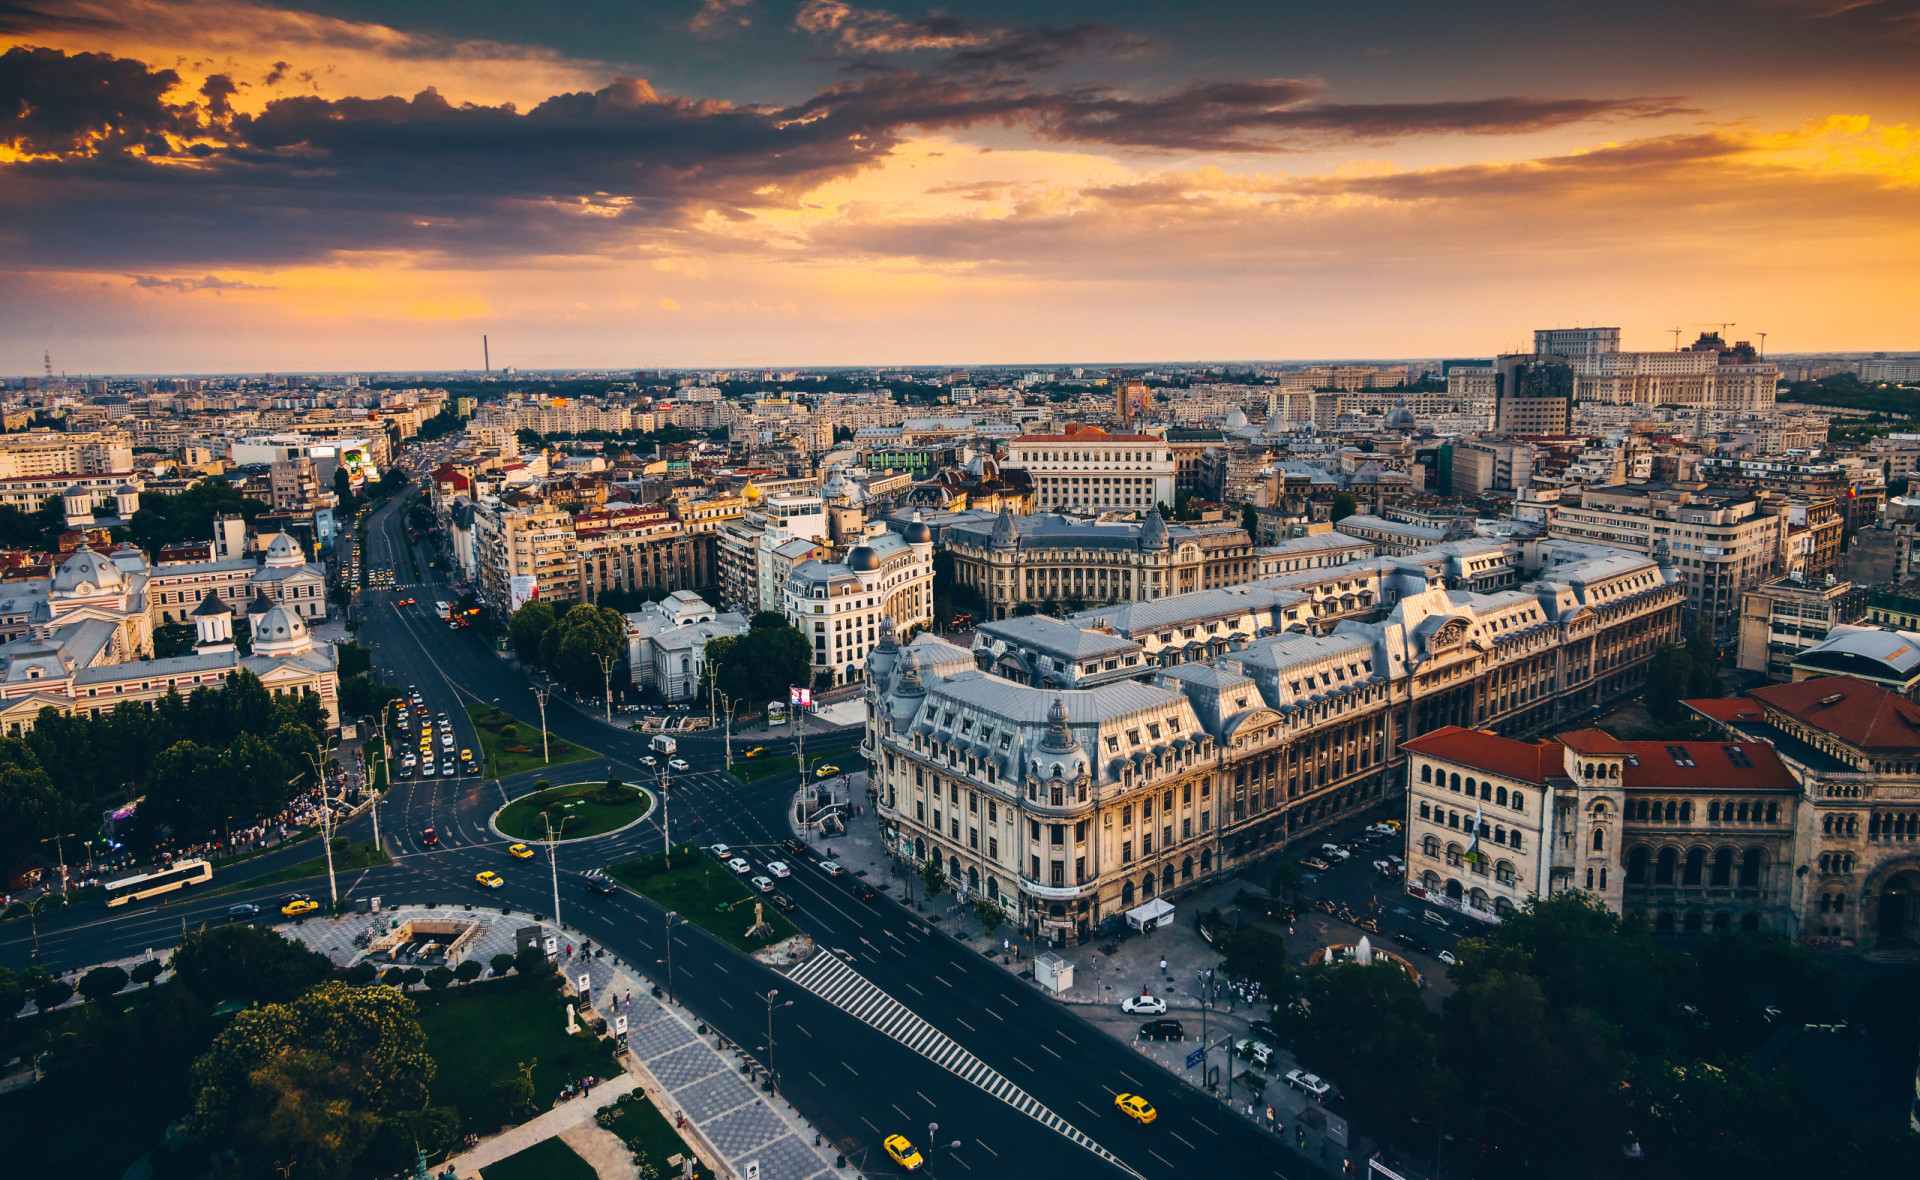 <p>Bucharest charges a tax of 1% of the hotel's room rate. Major cities charge a city tax, and mountain and sea towns charge a rescue tax.</p><p><a href="https://www.msn.com/en-my/community/channel/vid-7xx8mnucu55yw63we9va2gwr7uihbxwc68fxqp25x6tg4ftibpra?cvid=94631541bc0f4f89bfd59158d696ad7e">Follow us and access great exclusive content every day</a></p>